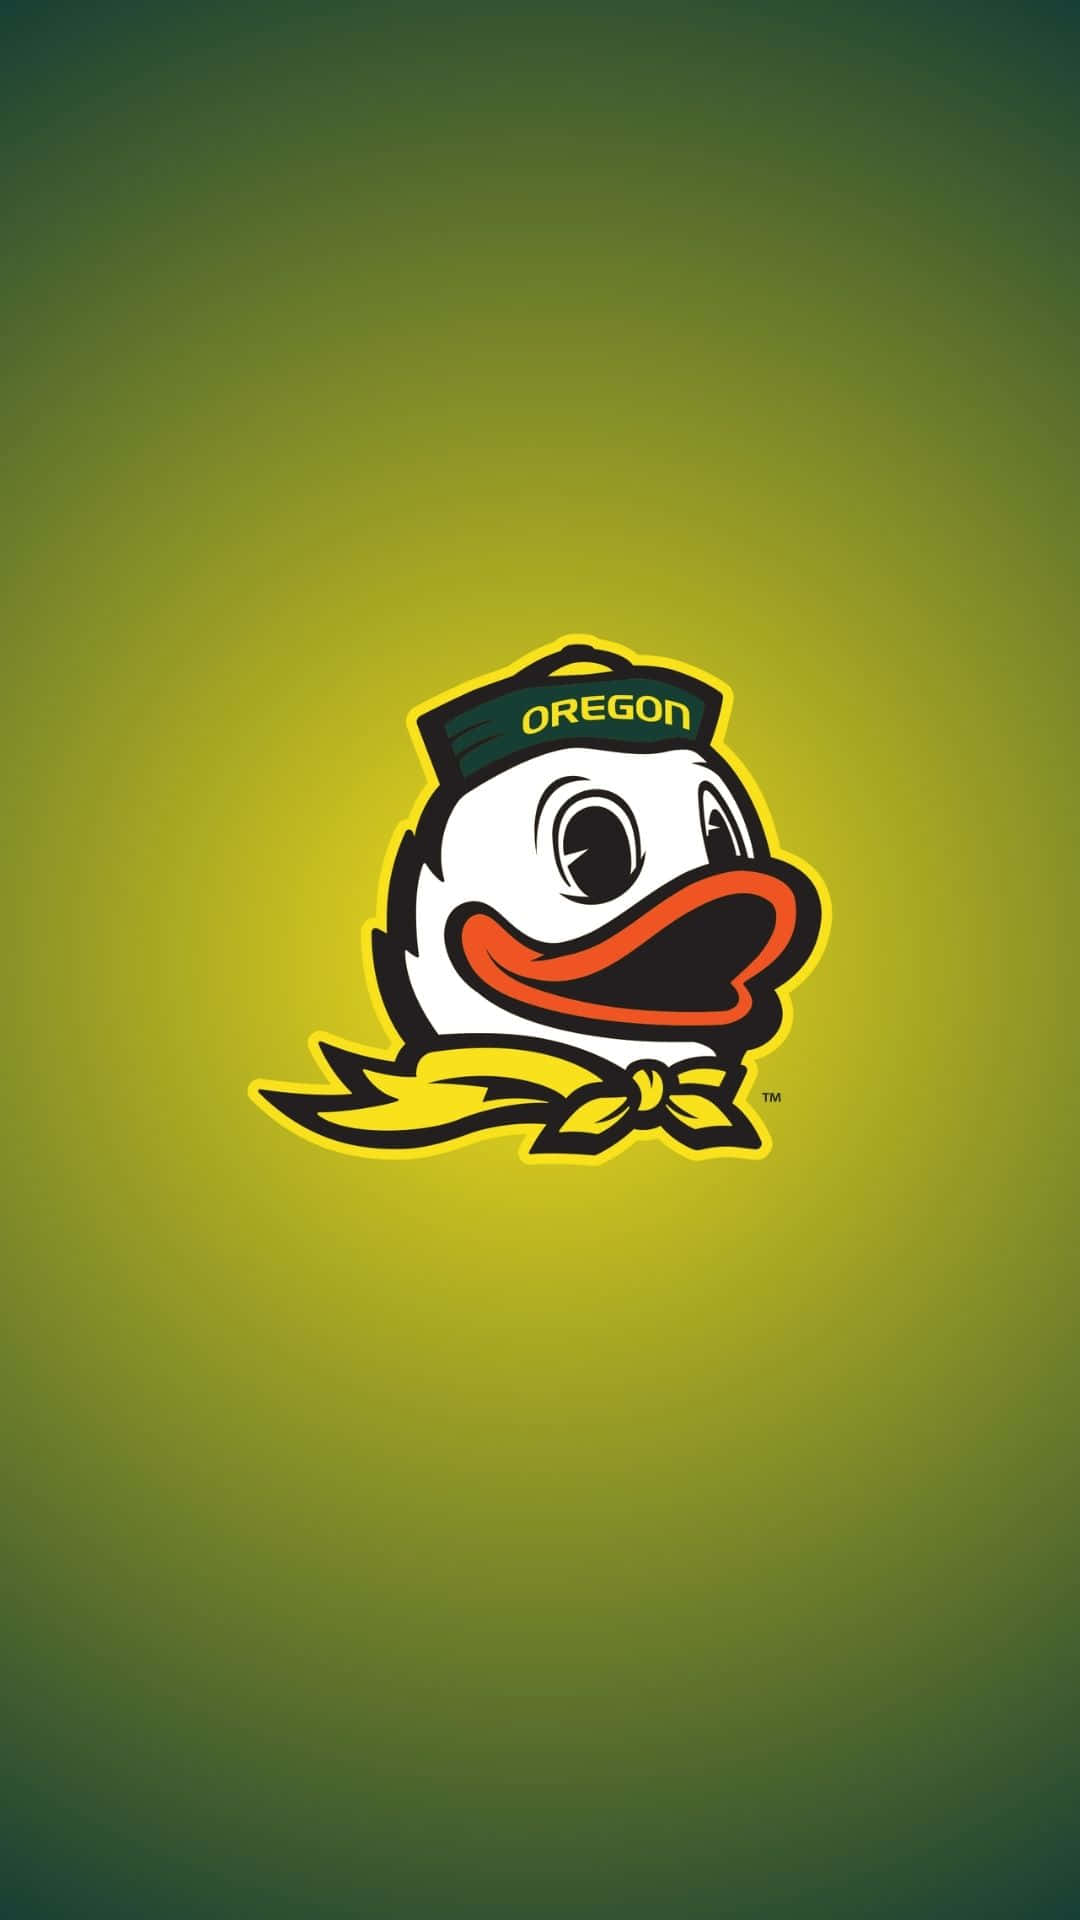 Exciting Oregon Ducks Football Game Moment Background